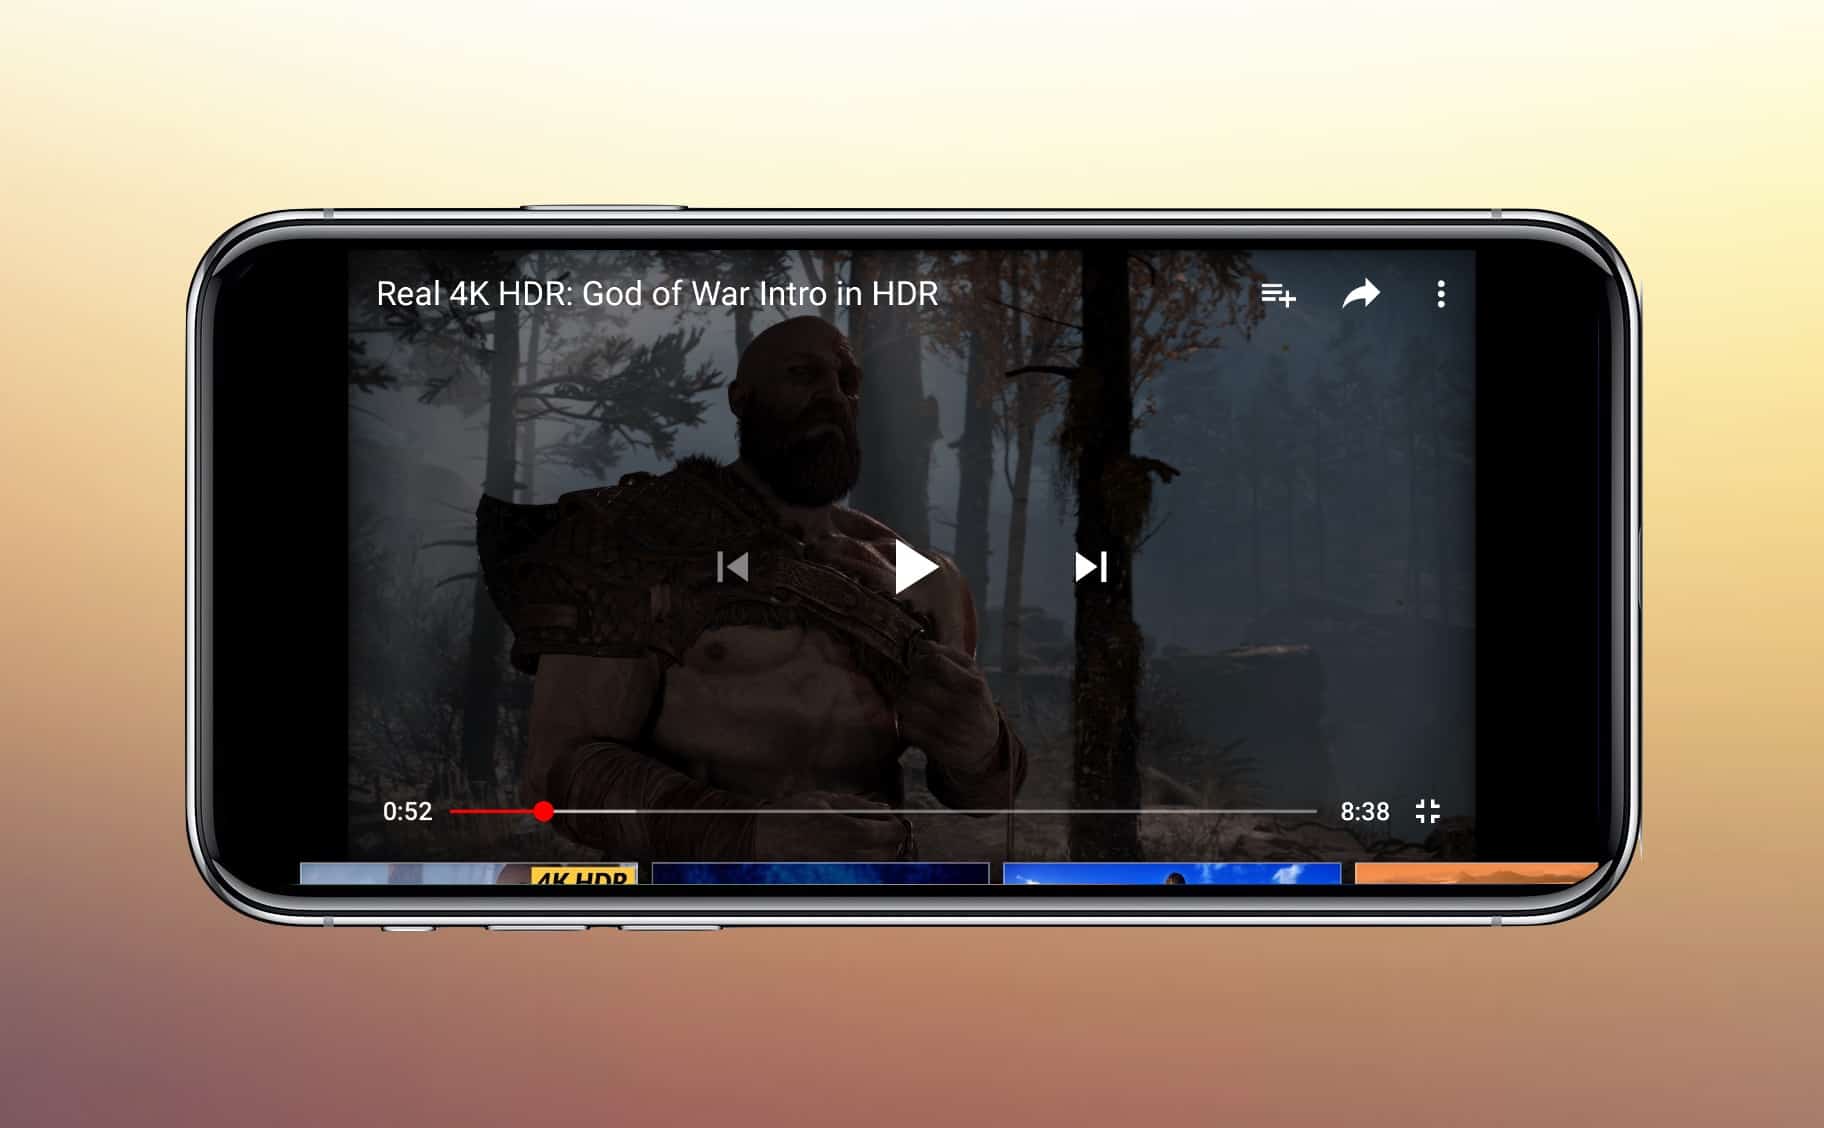 Displaying an HDR YouTube video on a non-HDR screen is impossible.